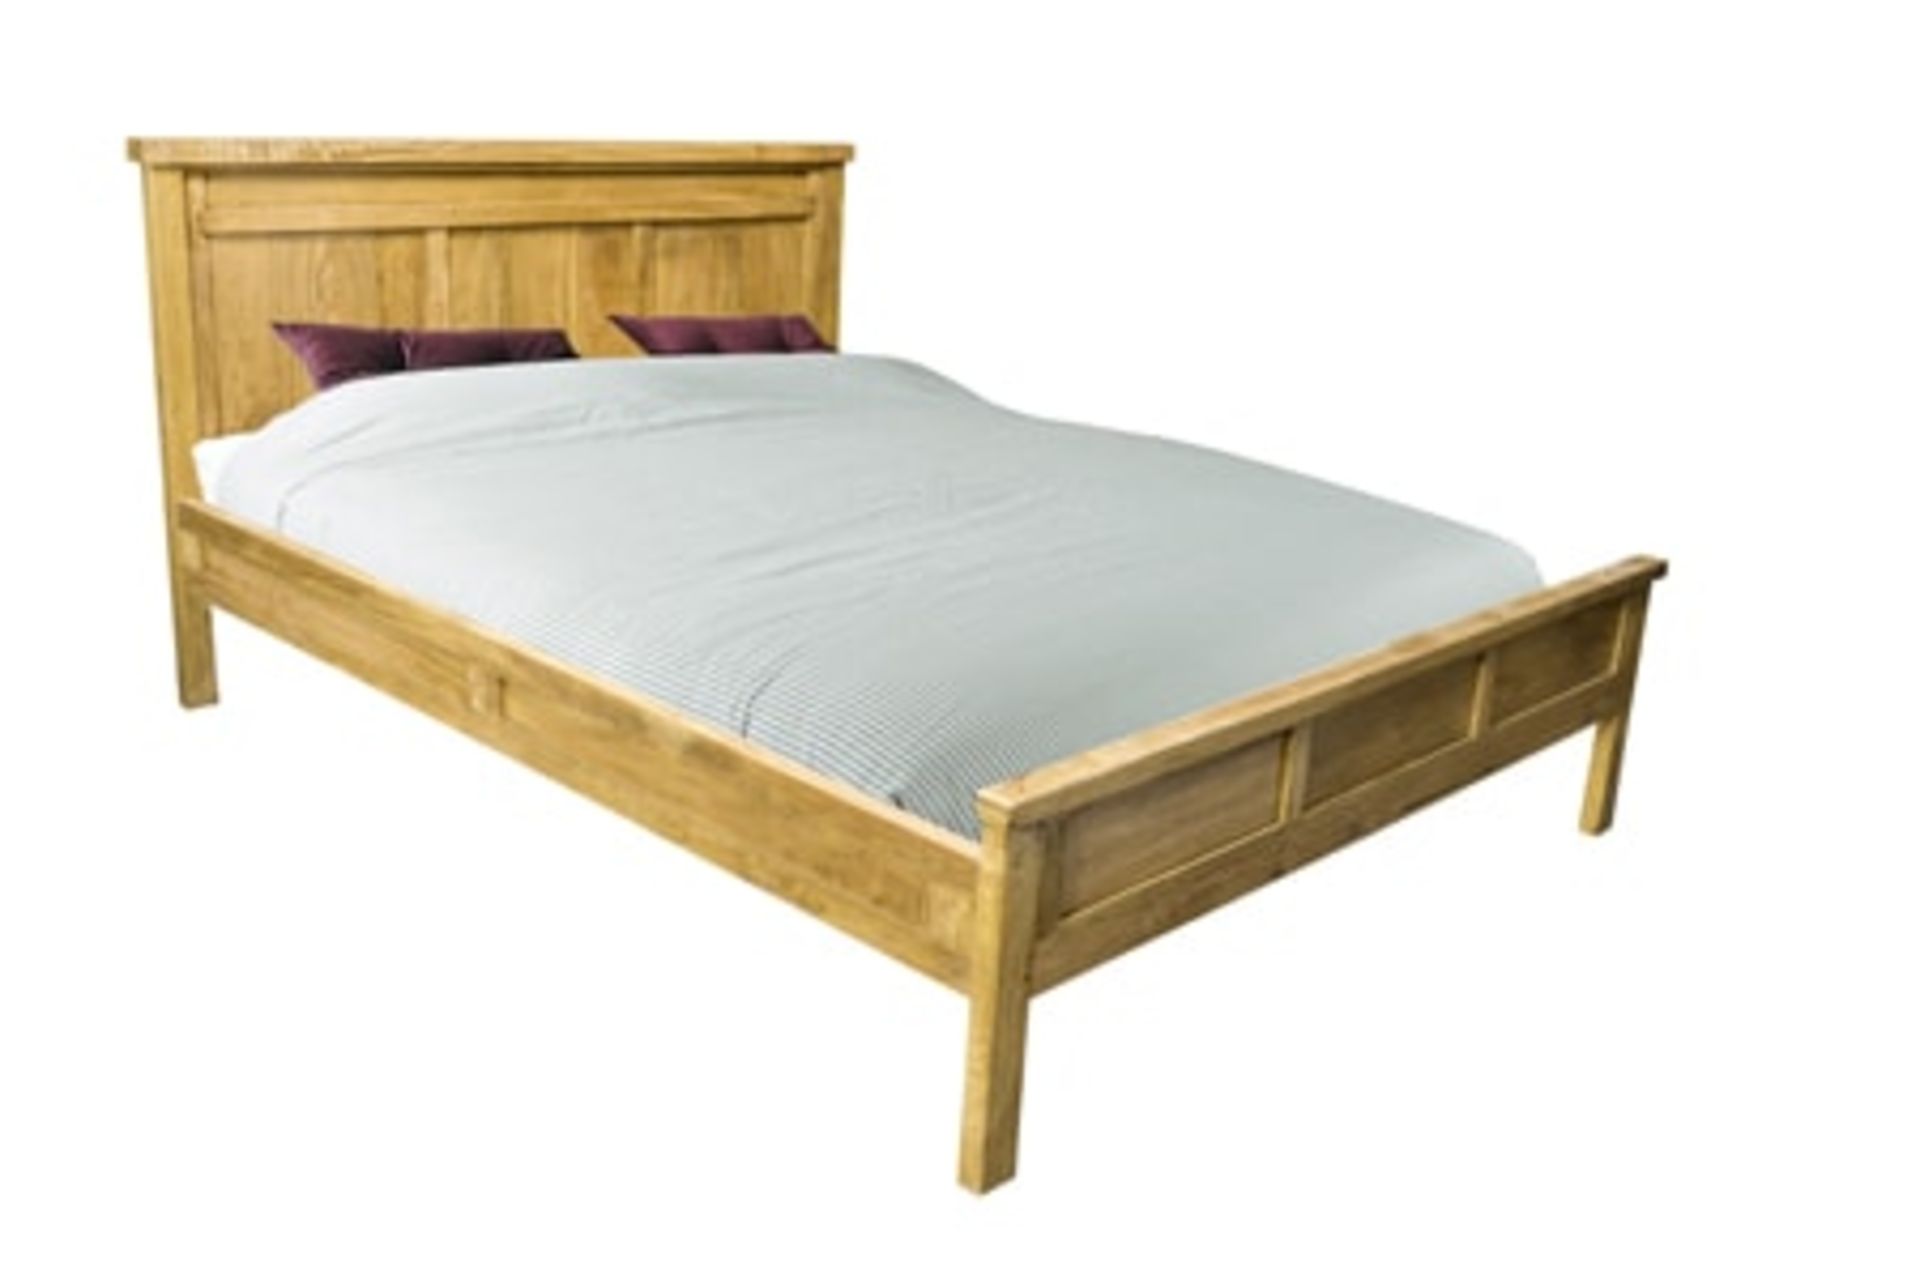 Soho Solid Wood 4ft6 Bed Frame ( Mattress not Supplied) 151 x 203 x 103cm (LOC SR25-4.6)